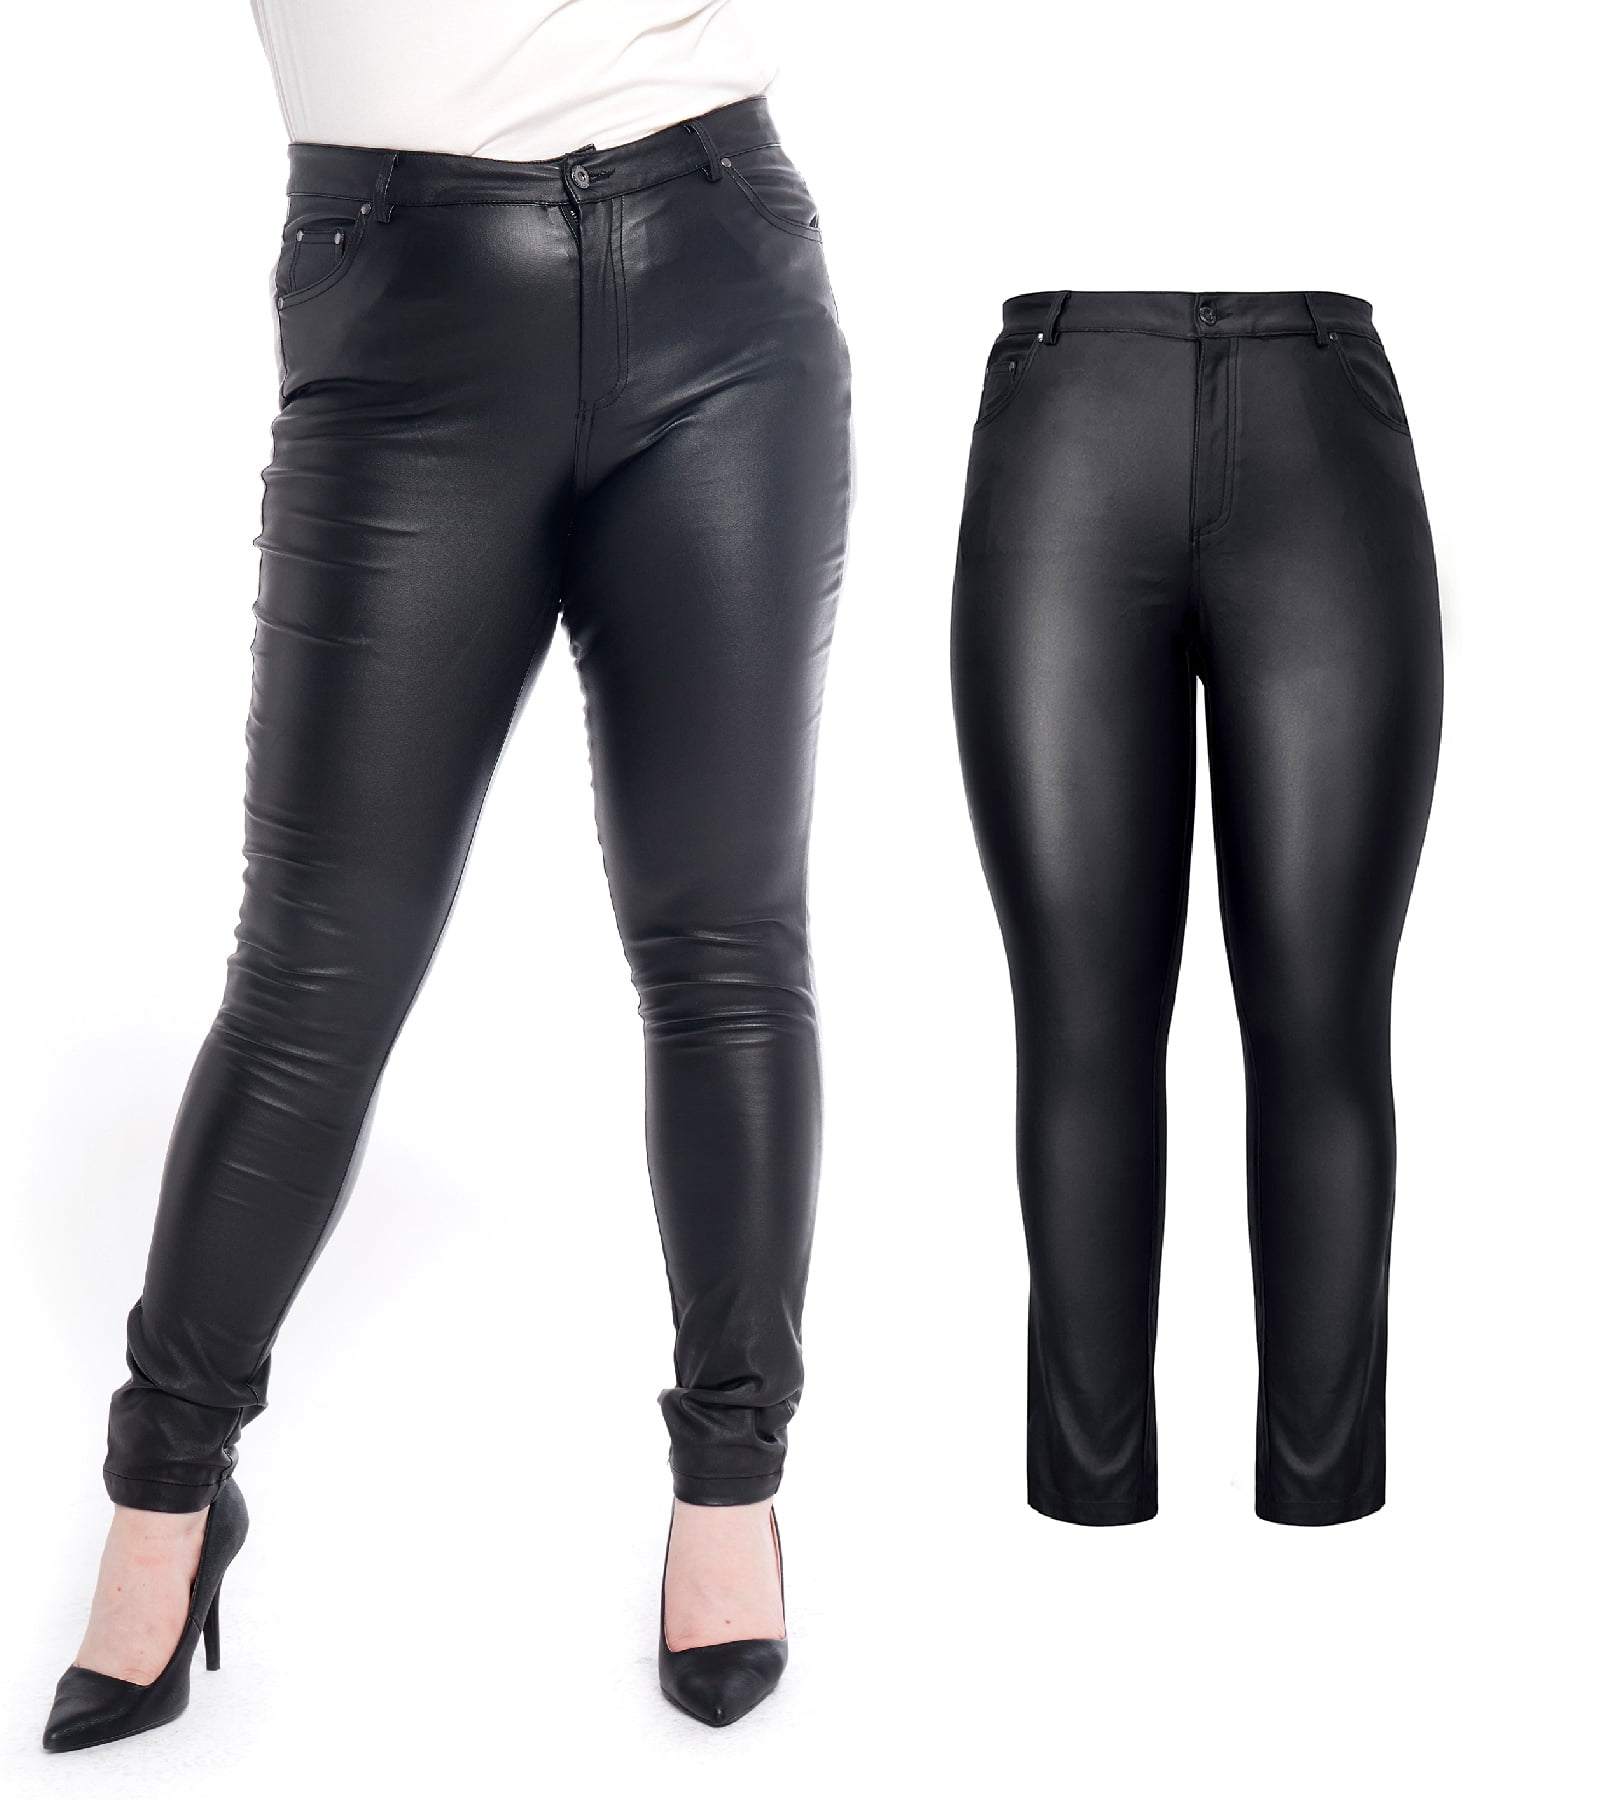 Whattry Women's Faux Leather Stretchy Legging Jegging Pants With Pockets 